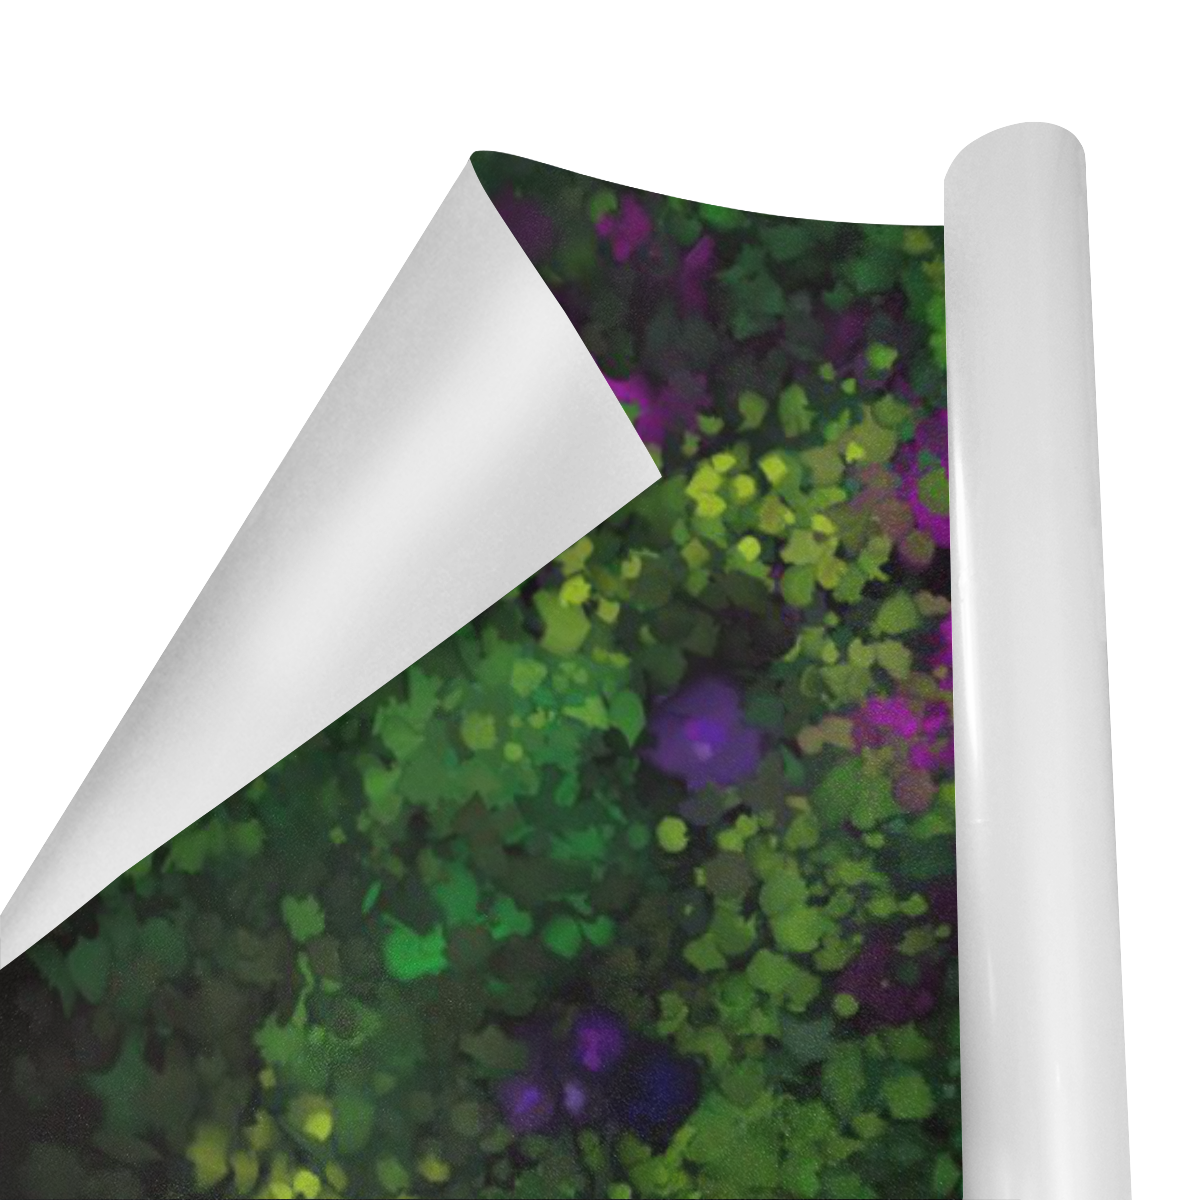 Wild Rose Garden, Oil painting. Red, purple, green Gift Wrapping Paper 58"x 23" (5 Rolls)